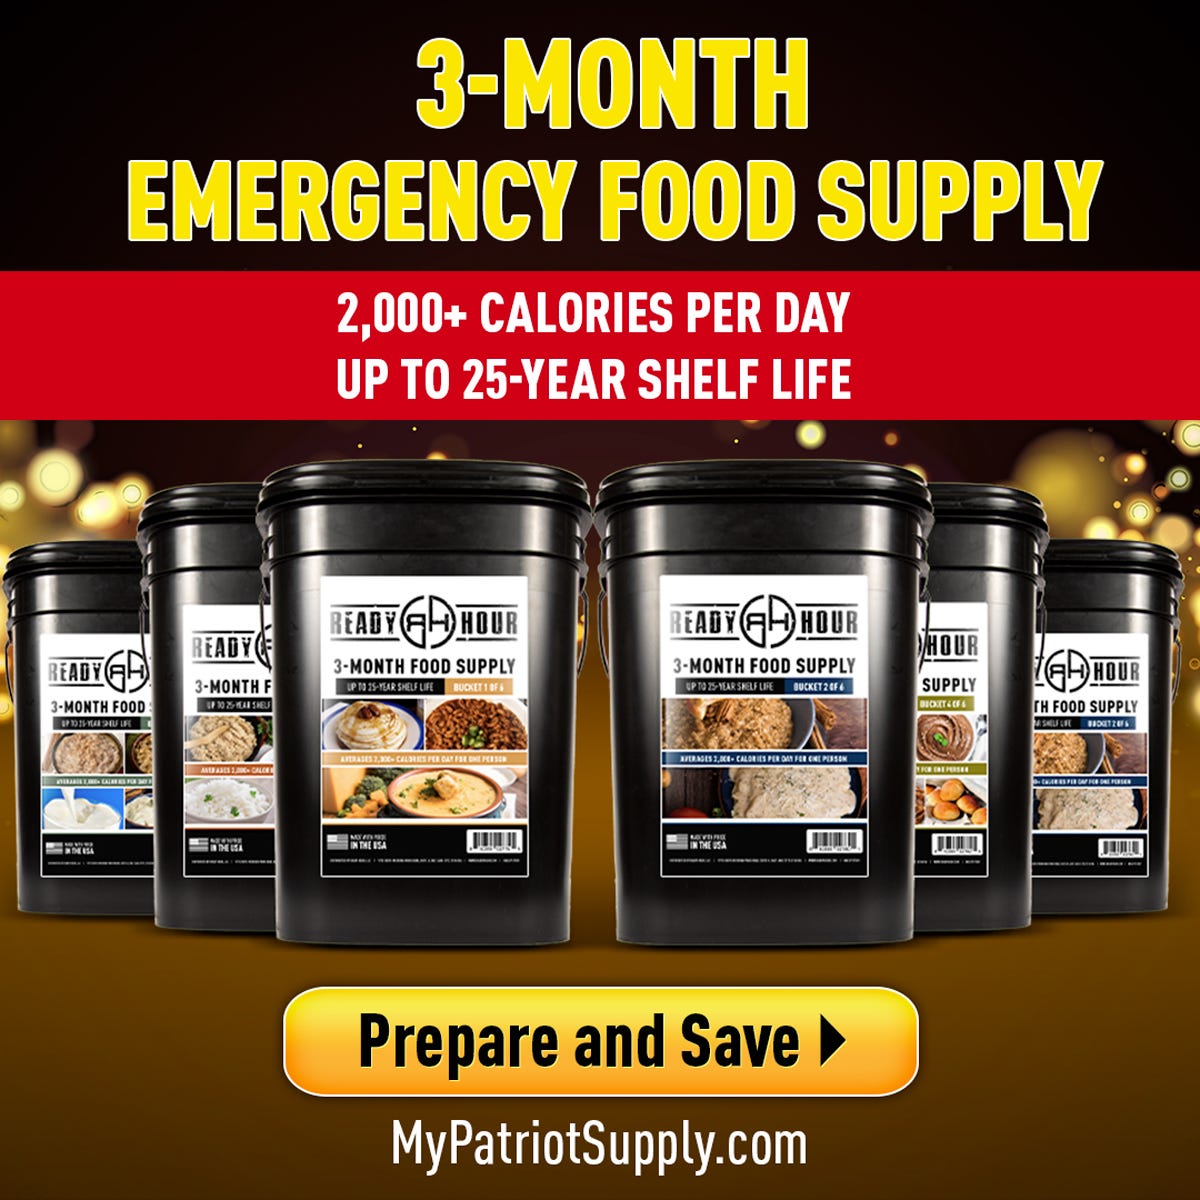 3-month emergency food supply